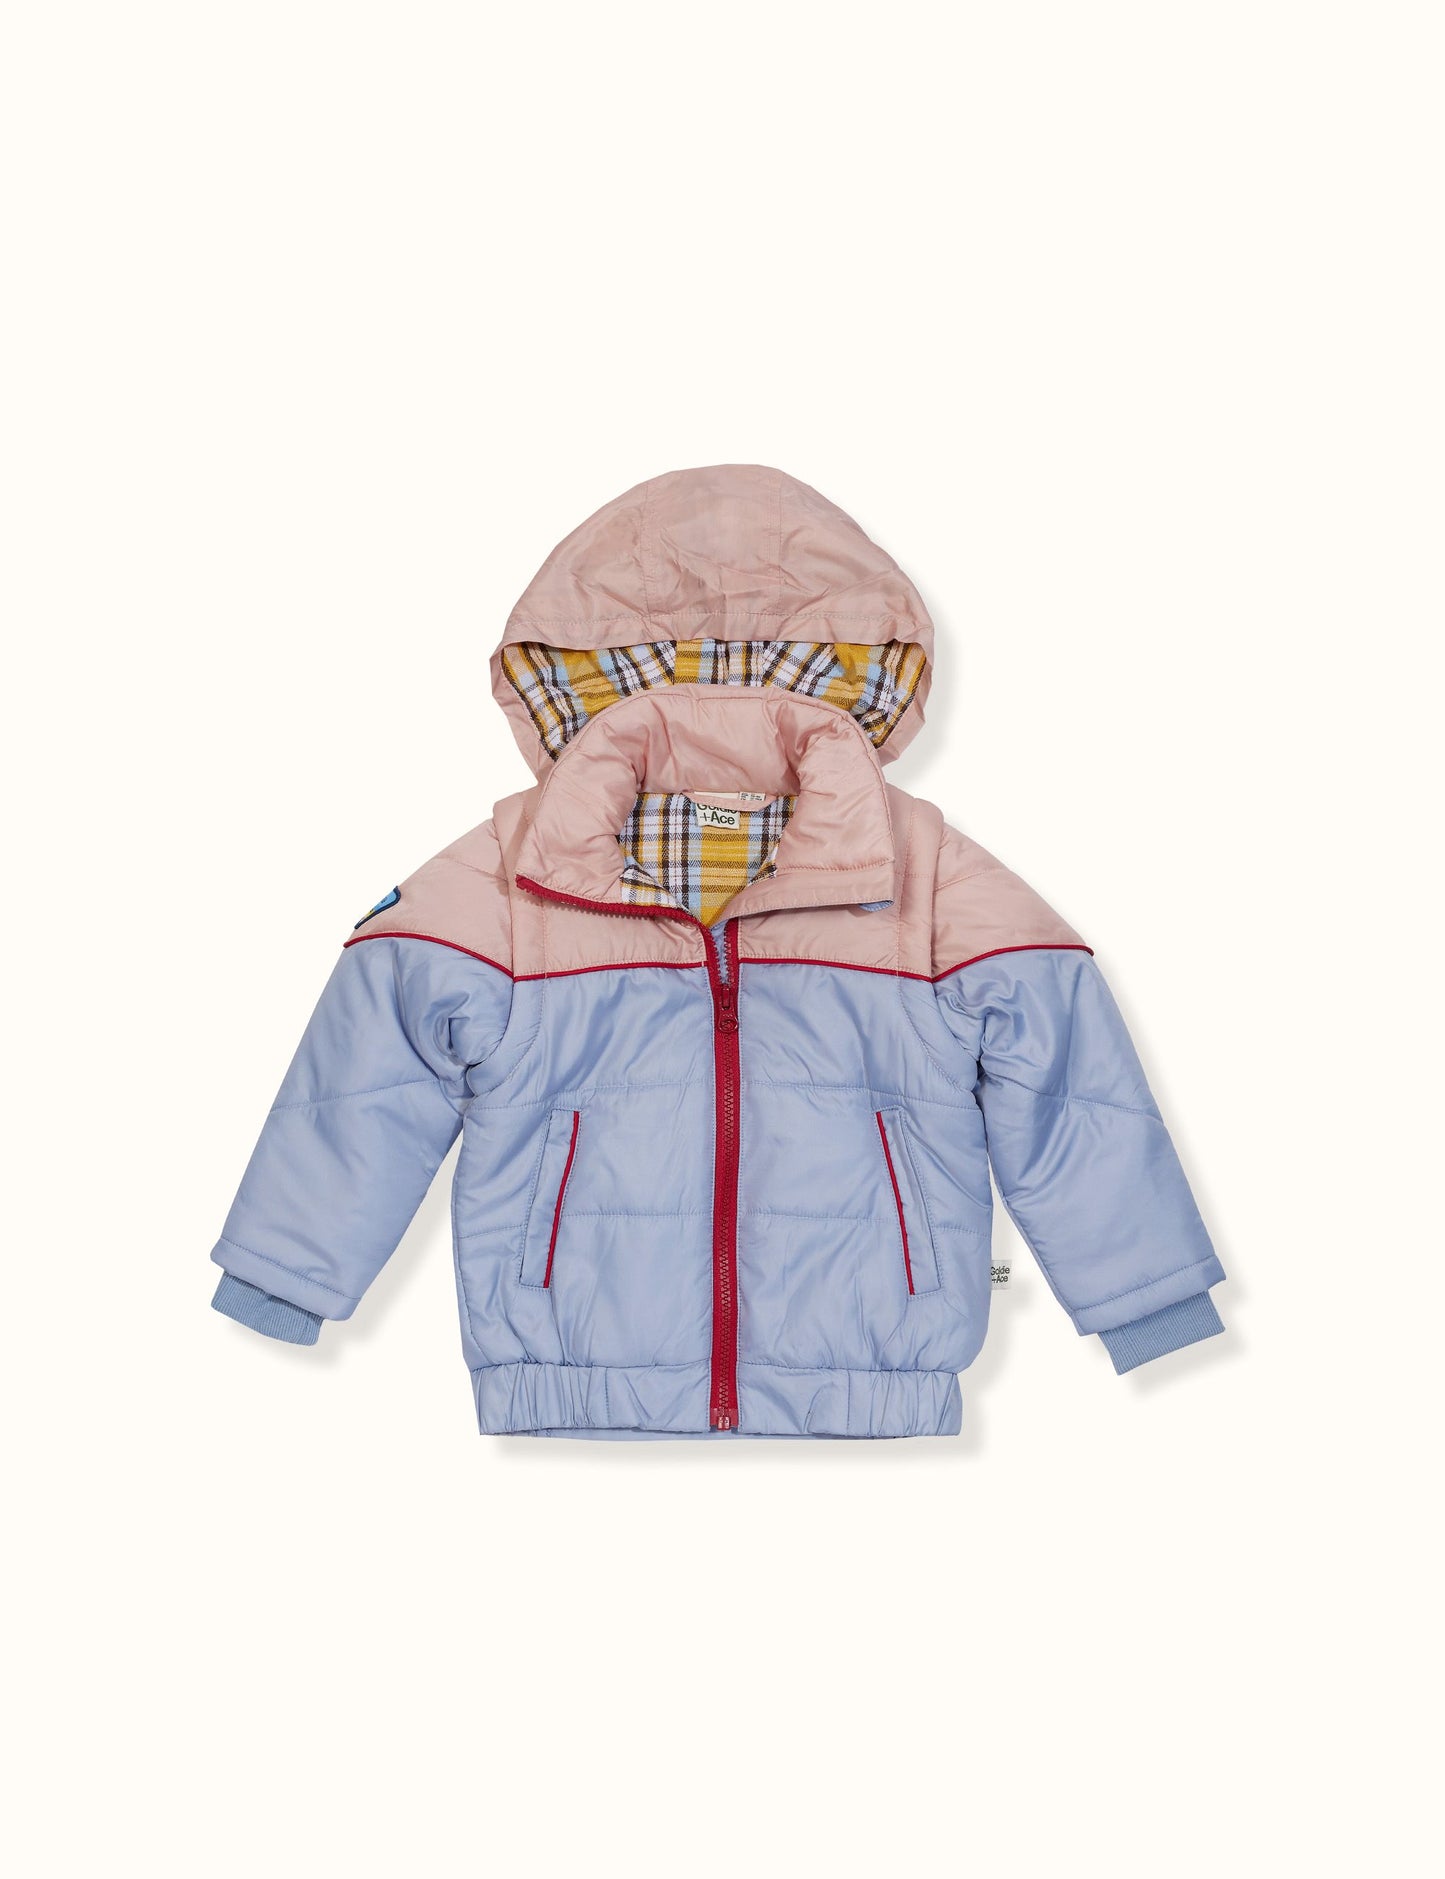 Load image into Gallery viewer, Goldie + Ace - Stevie Vintage Parka w/ Zip Off Sleeves (Sky Blush)
